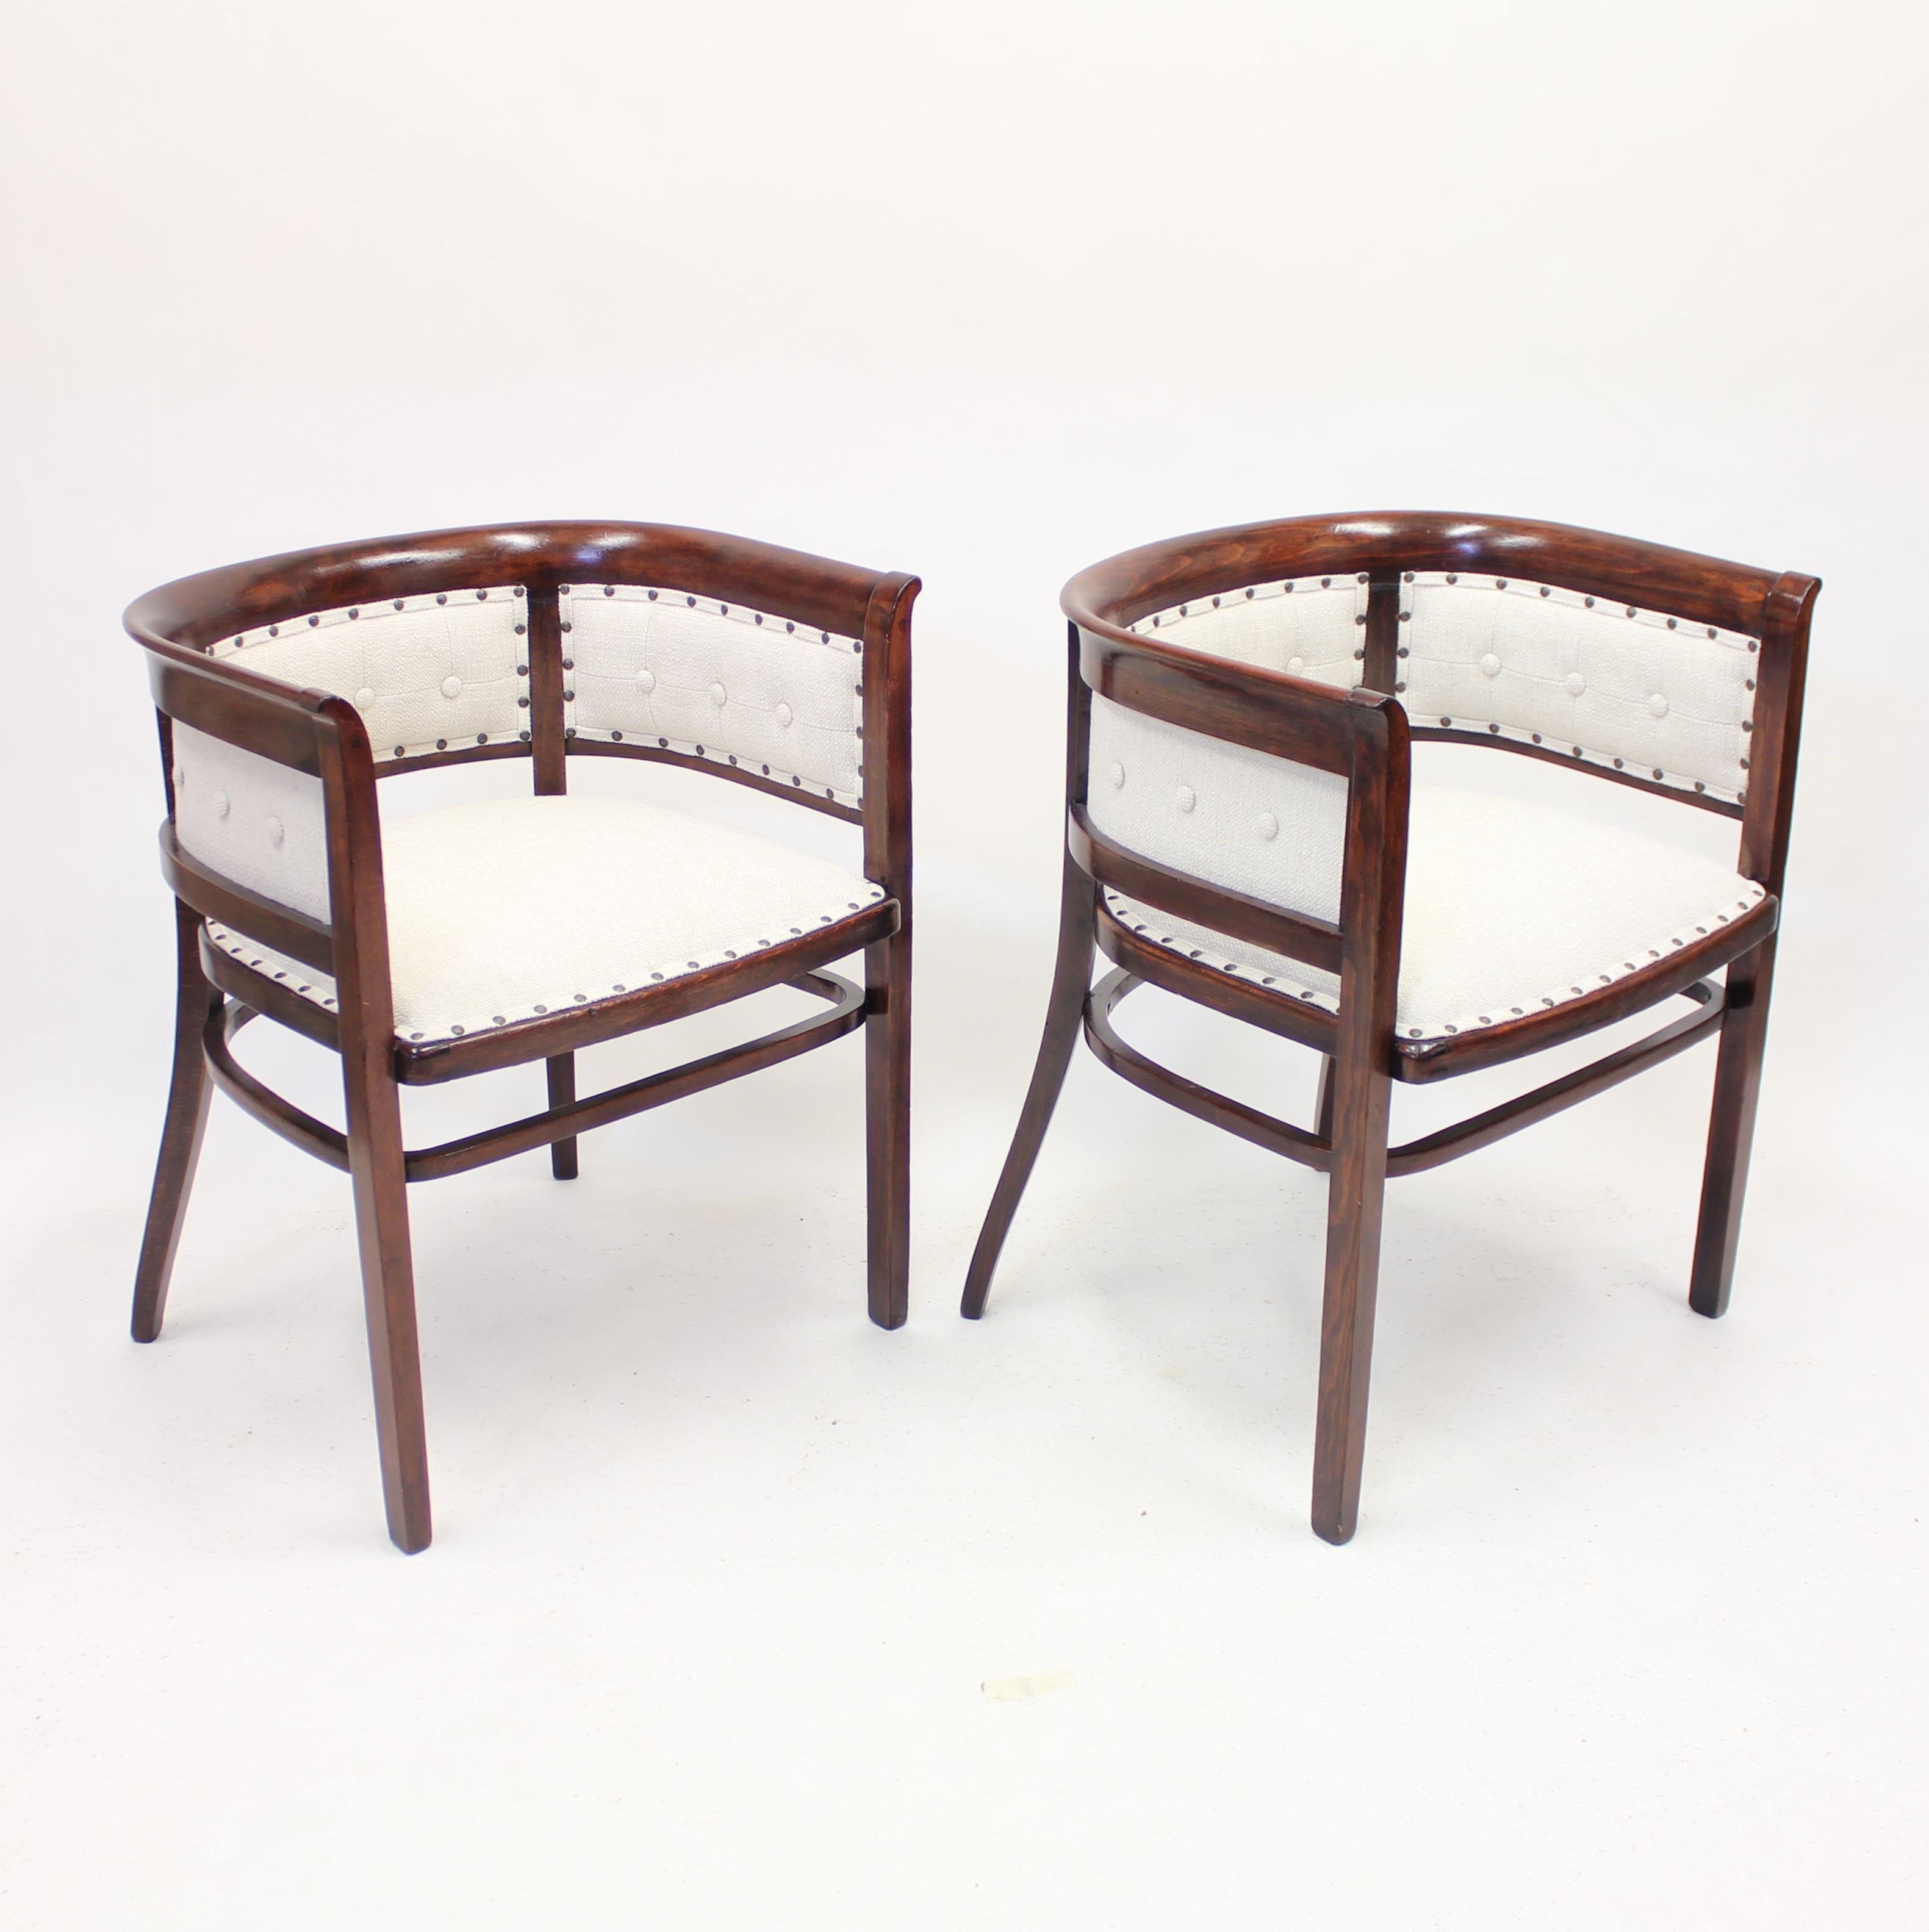 Fabric Pair of Fischel Armchairs, in the Style of Josef Hoffmann, Early 20th Century For Sale